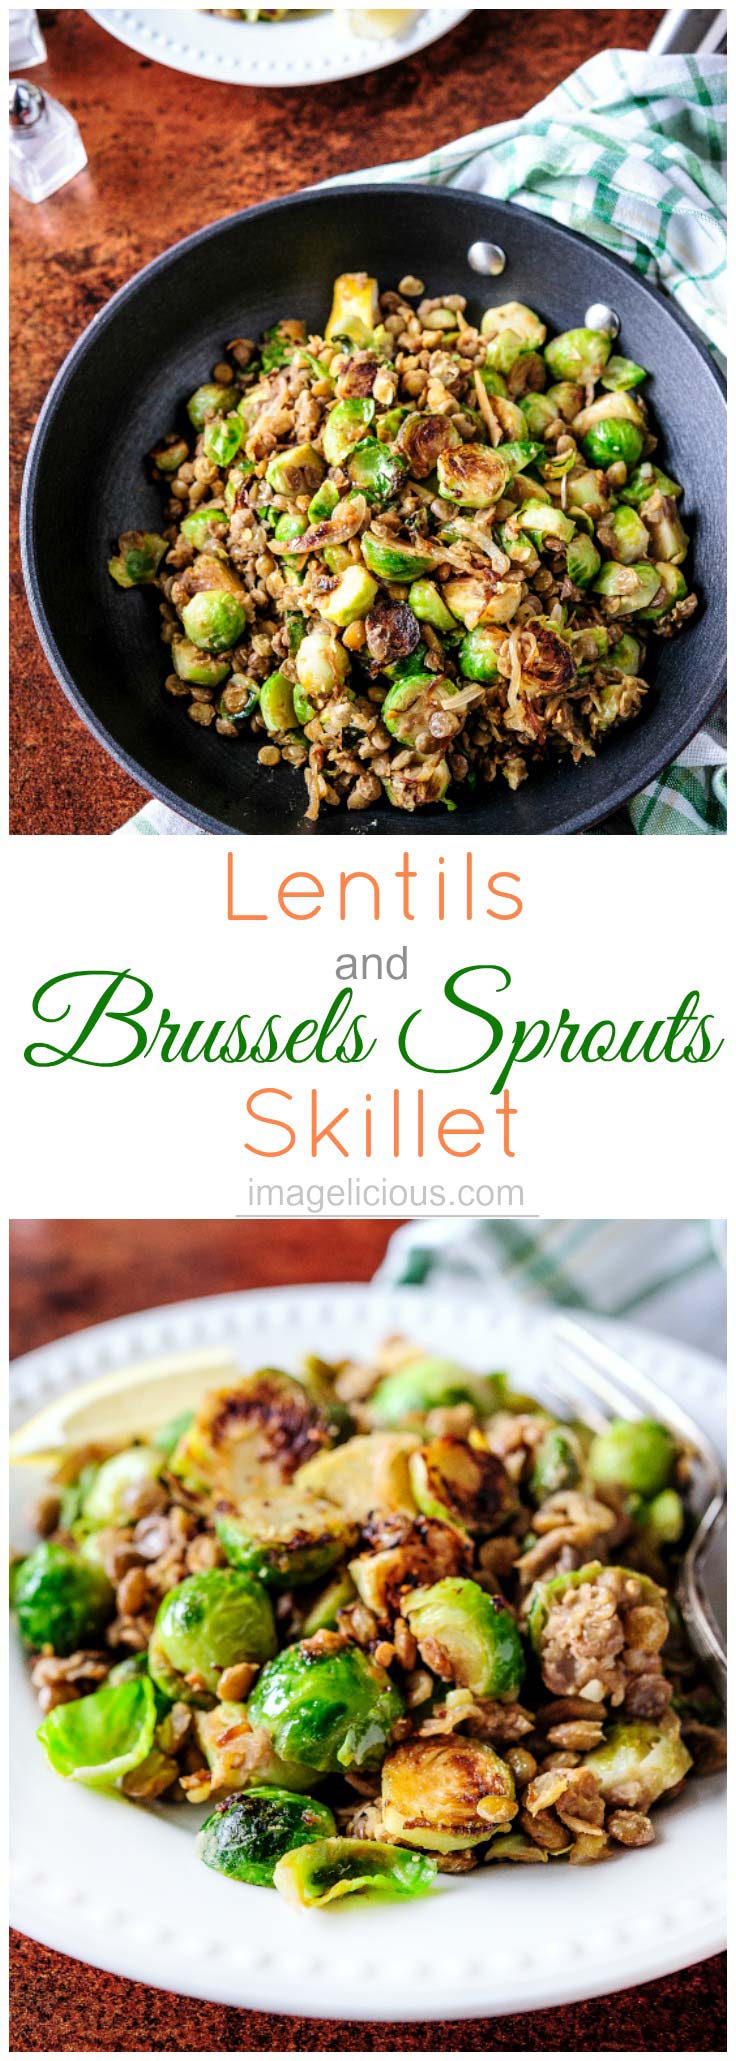 This Lentils and Brussels Sprouts skillet is a delicious way of incorporating filling lentils and healthy vegetables into your weeknight meals or meatless mondays. Very quick to prepare the Lentils and Brussels Sprouts are great on their own or as a side to your favourite protein | Imagelicious